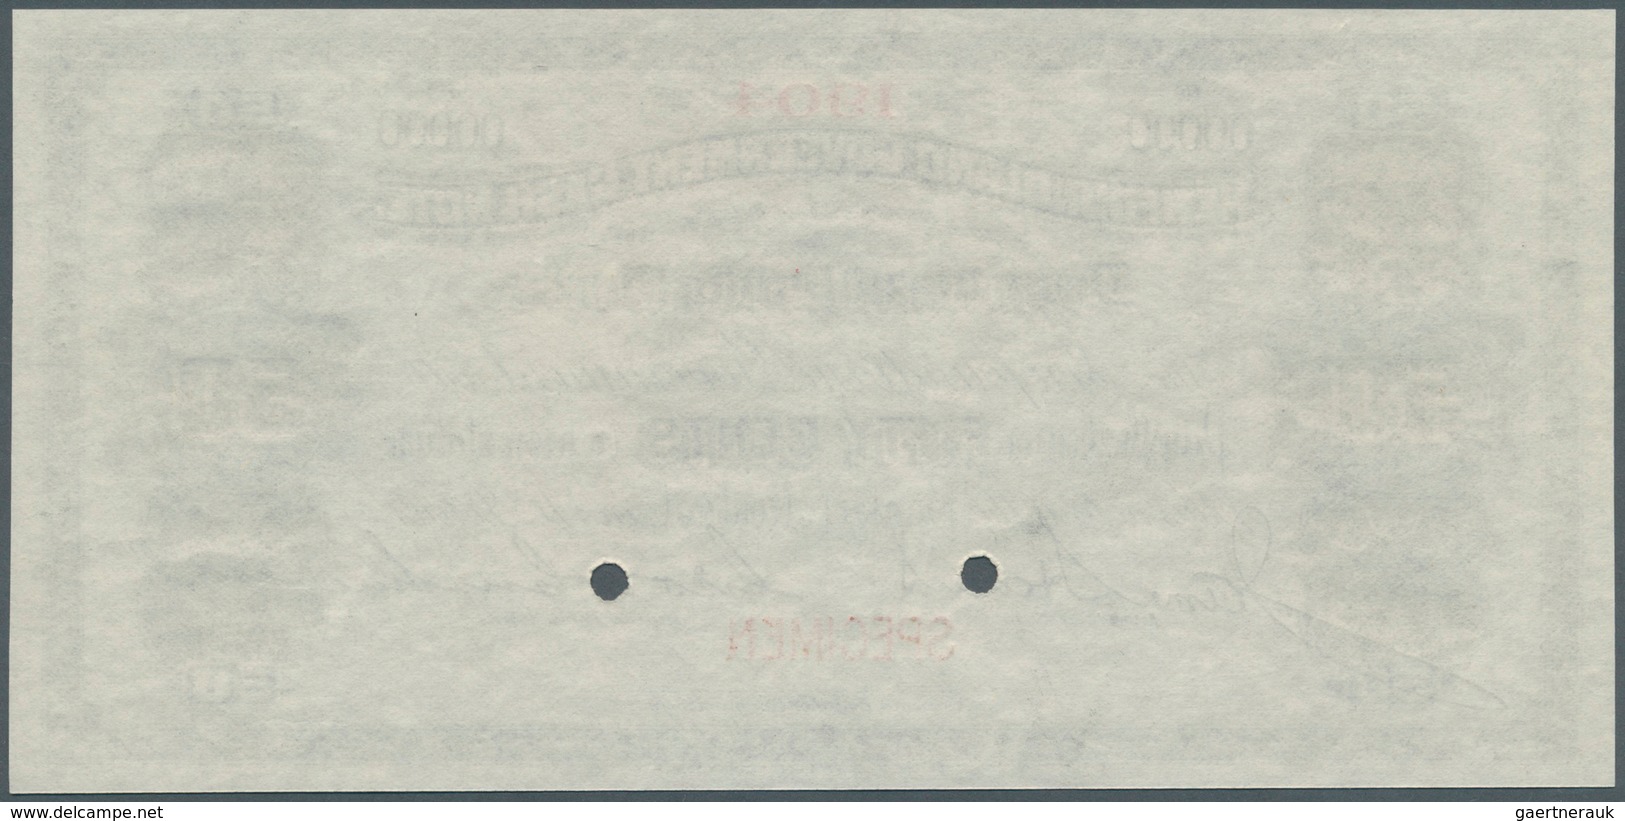 02121 Newfoundland / Neufundland: 50 Cents ND Specimen P. A5s With Small Red "Specimen" Overprint At Lower - Canada